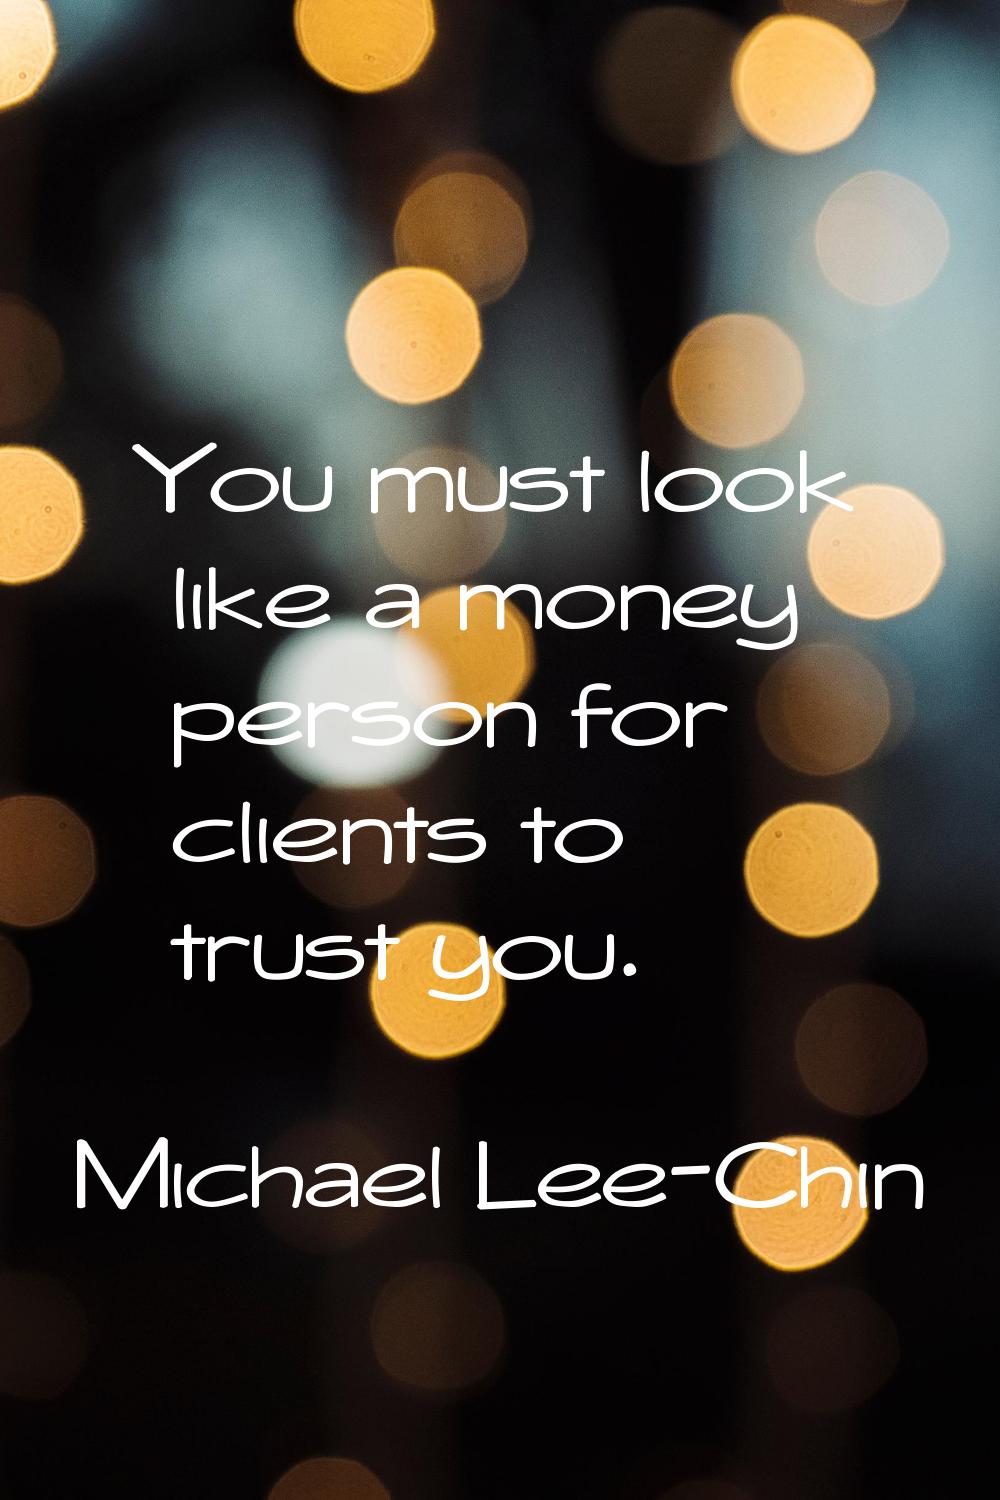 You must look like a money person for clients to trust you.